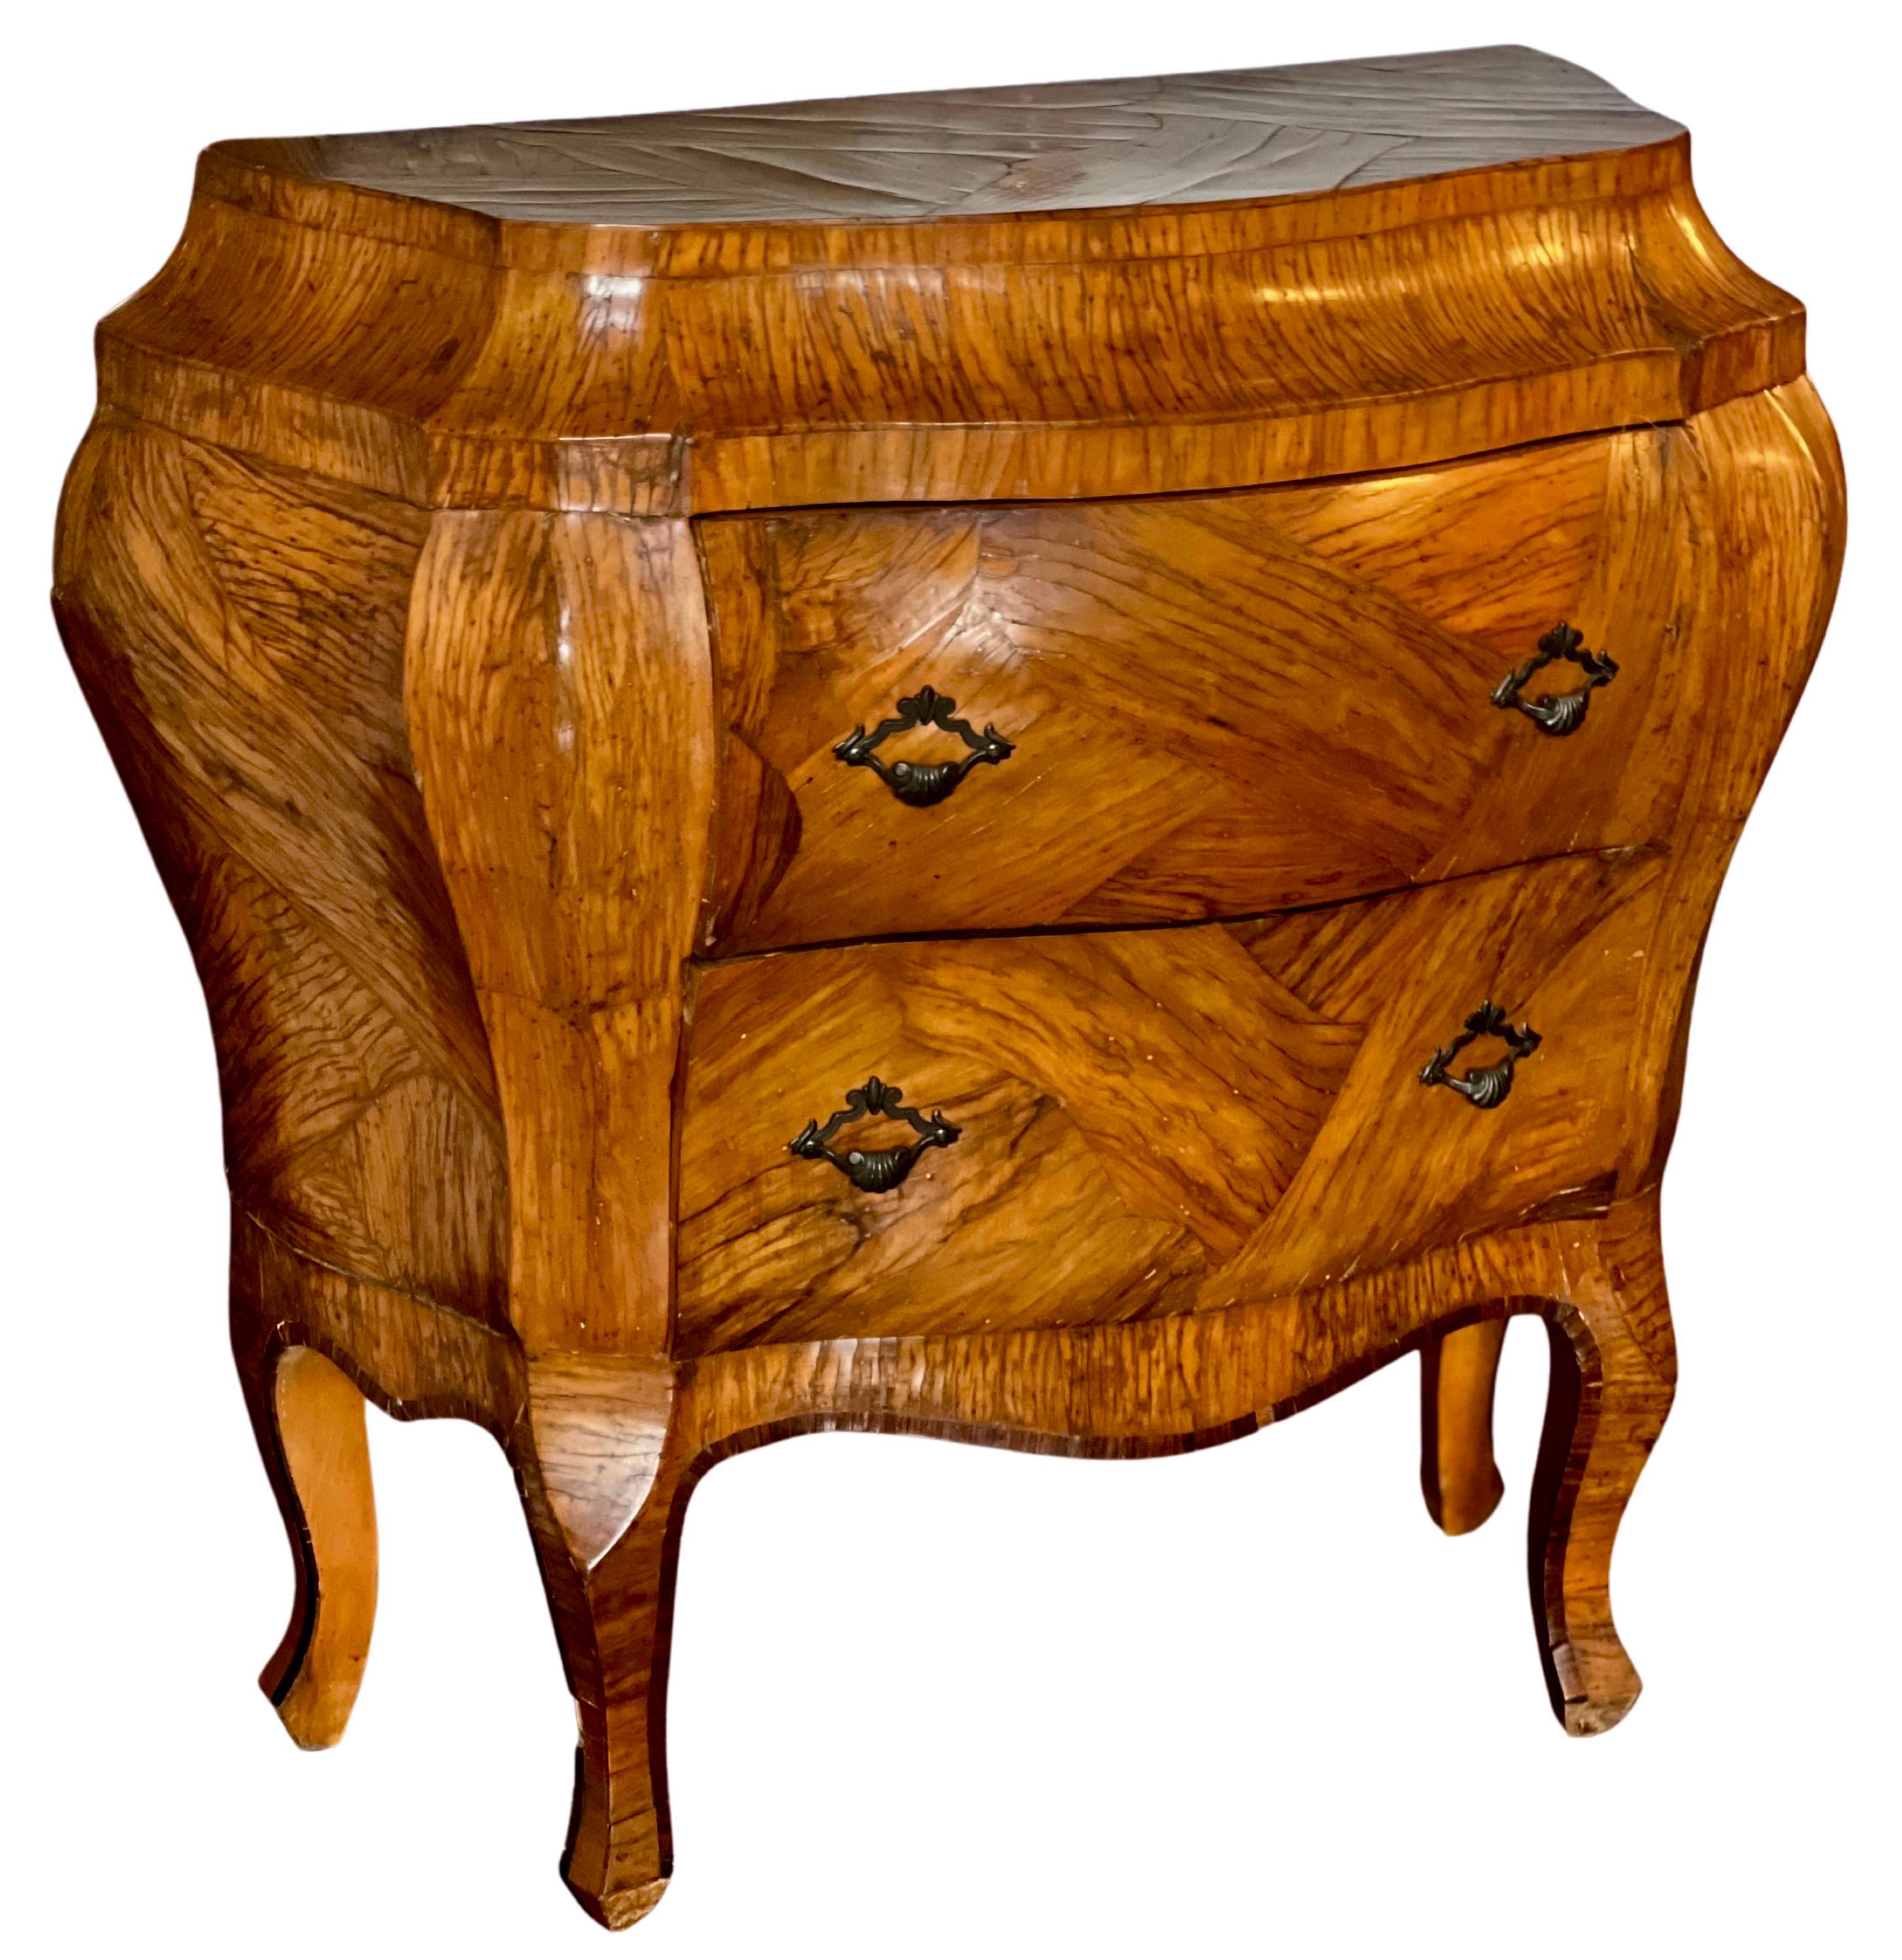 Italian Rococo style olive wood bombe chest, c. 1920.

Sophisticated petite commode crafted of olive wood with a unique parquetry design. It is a great size allowing it to be extremely versatile. Two deep drawers with original handles provide plenty